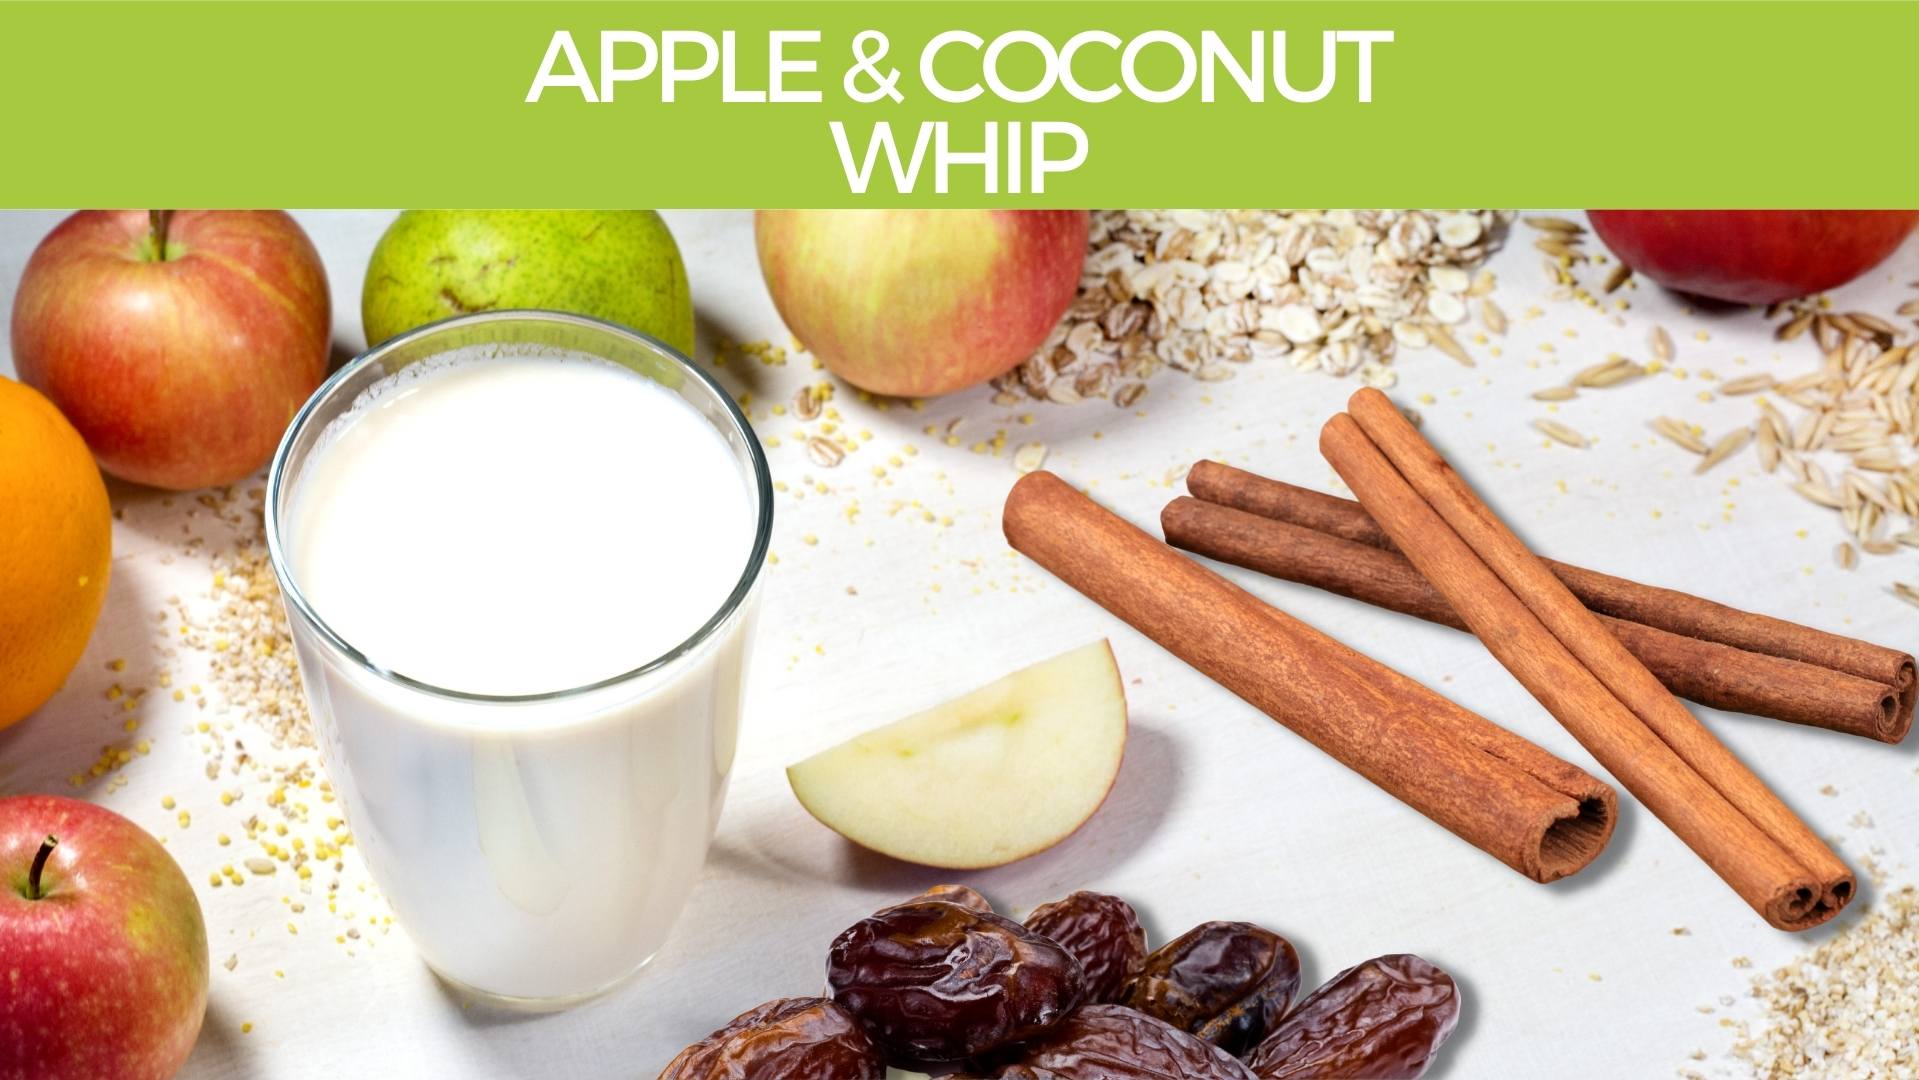 Apple and Coconut Whip